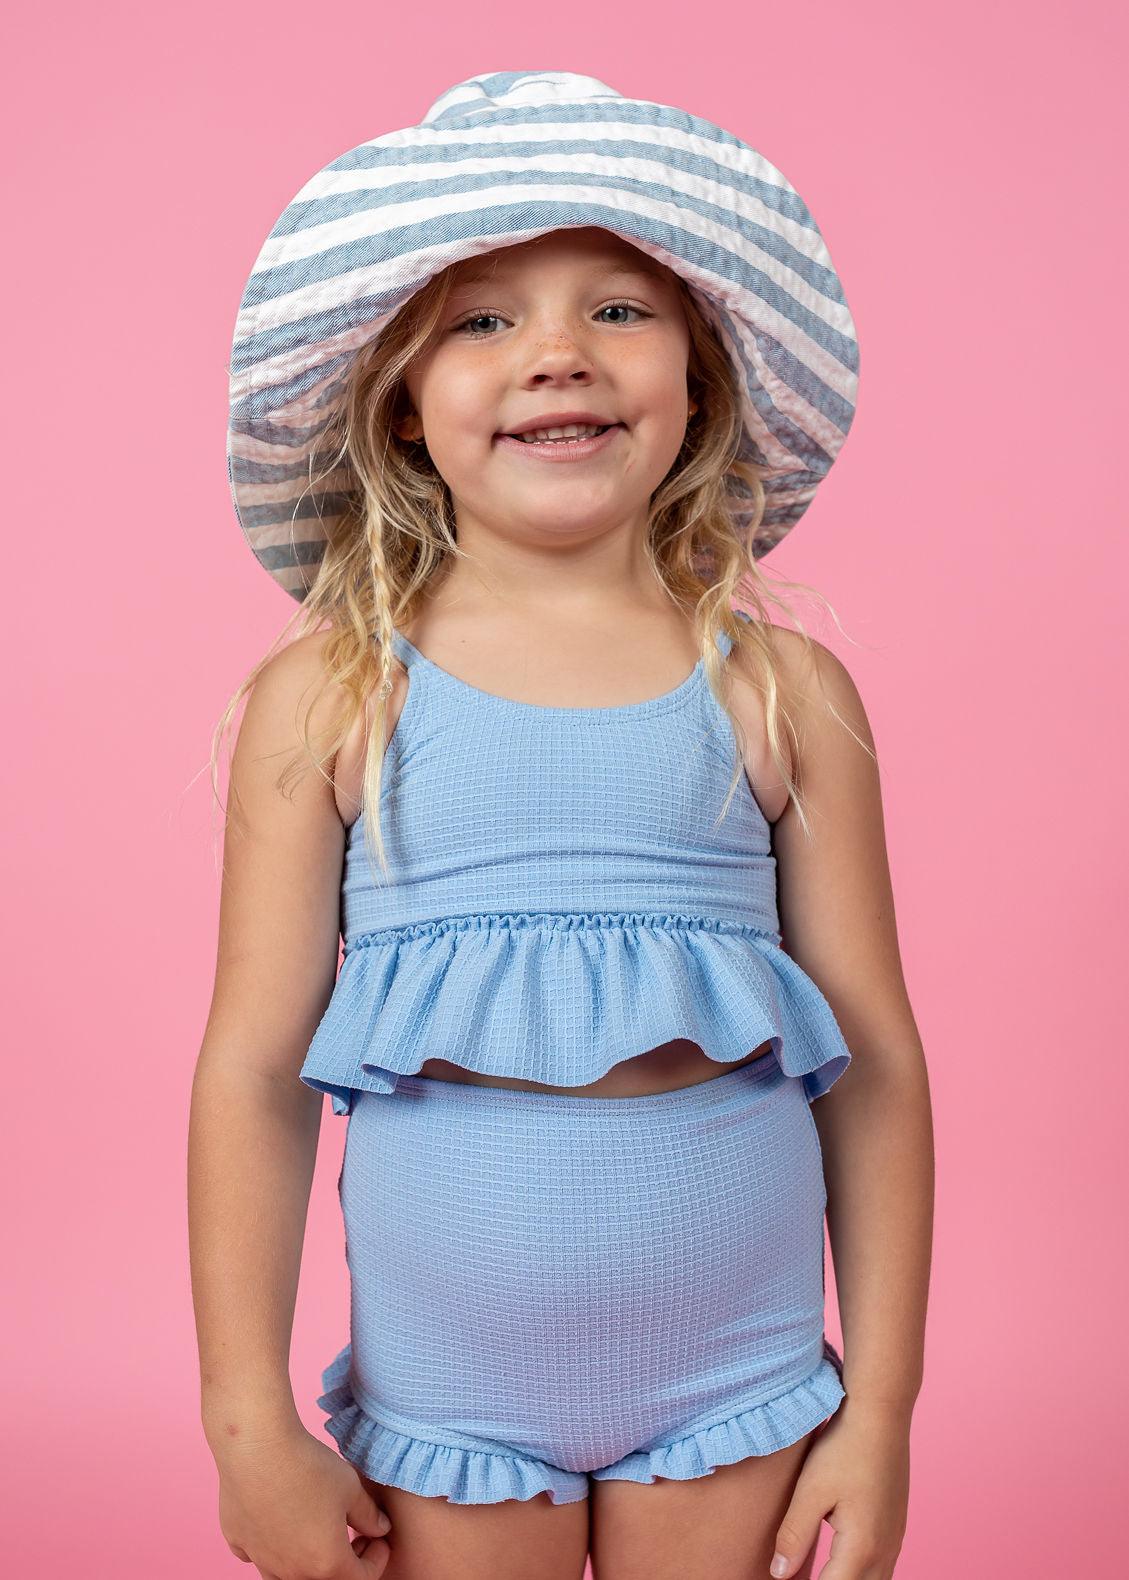 Girls Crop Top Swimsuit - Waffled Barely Blue